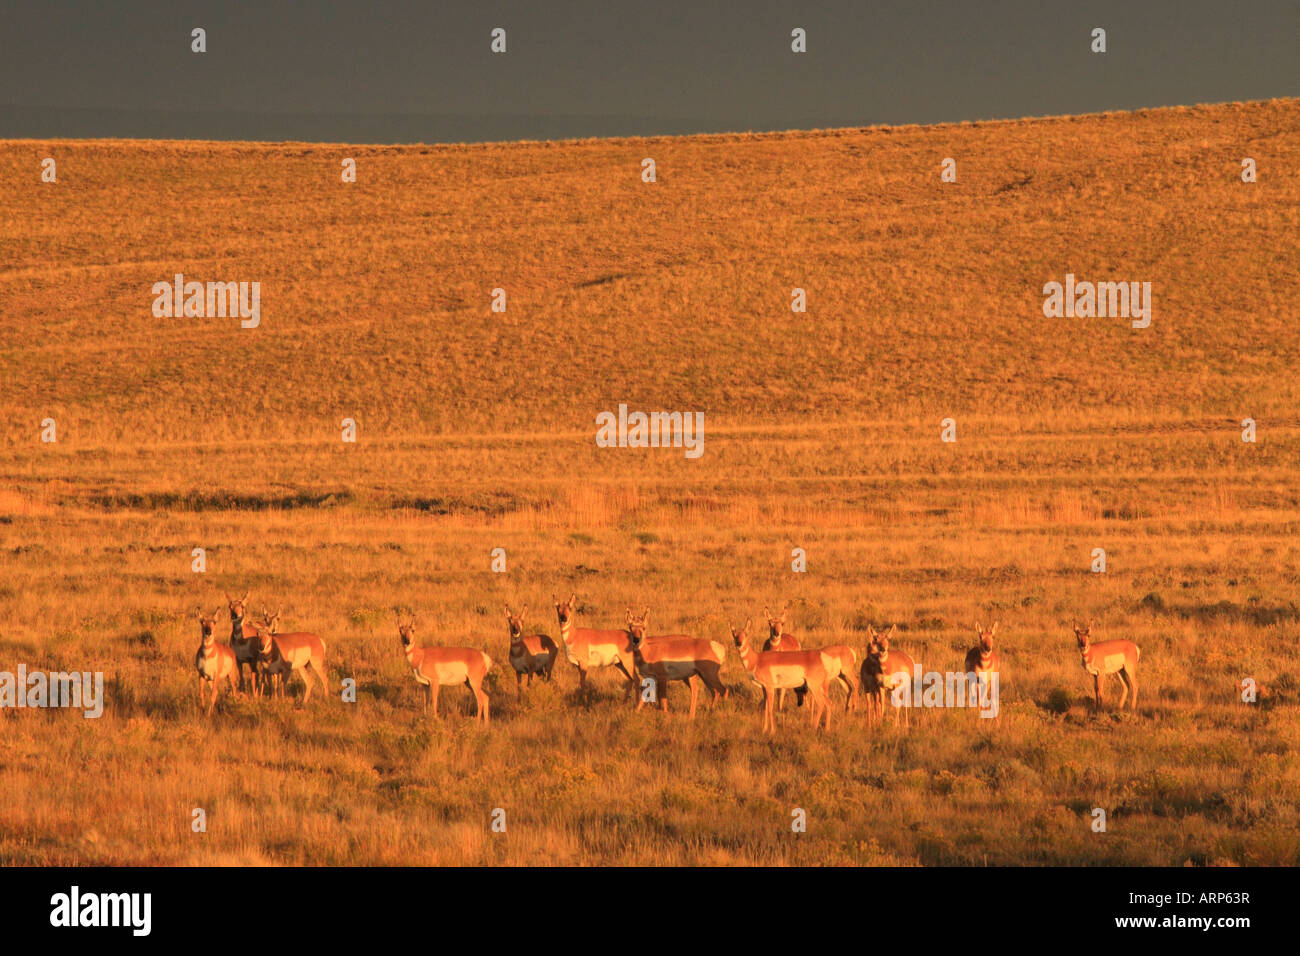 Prong Horn Antelope, Pinedale, Wyoming, USA Stock Photo